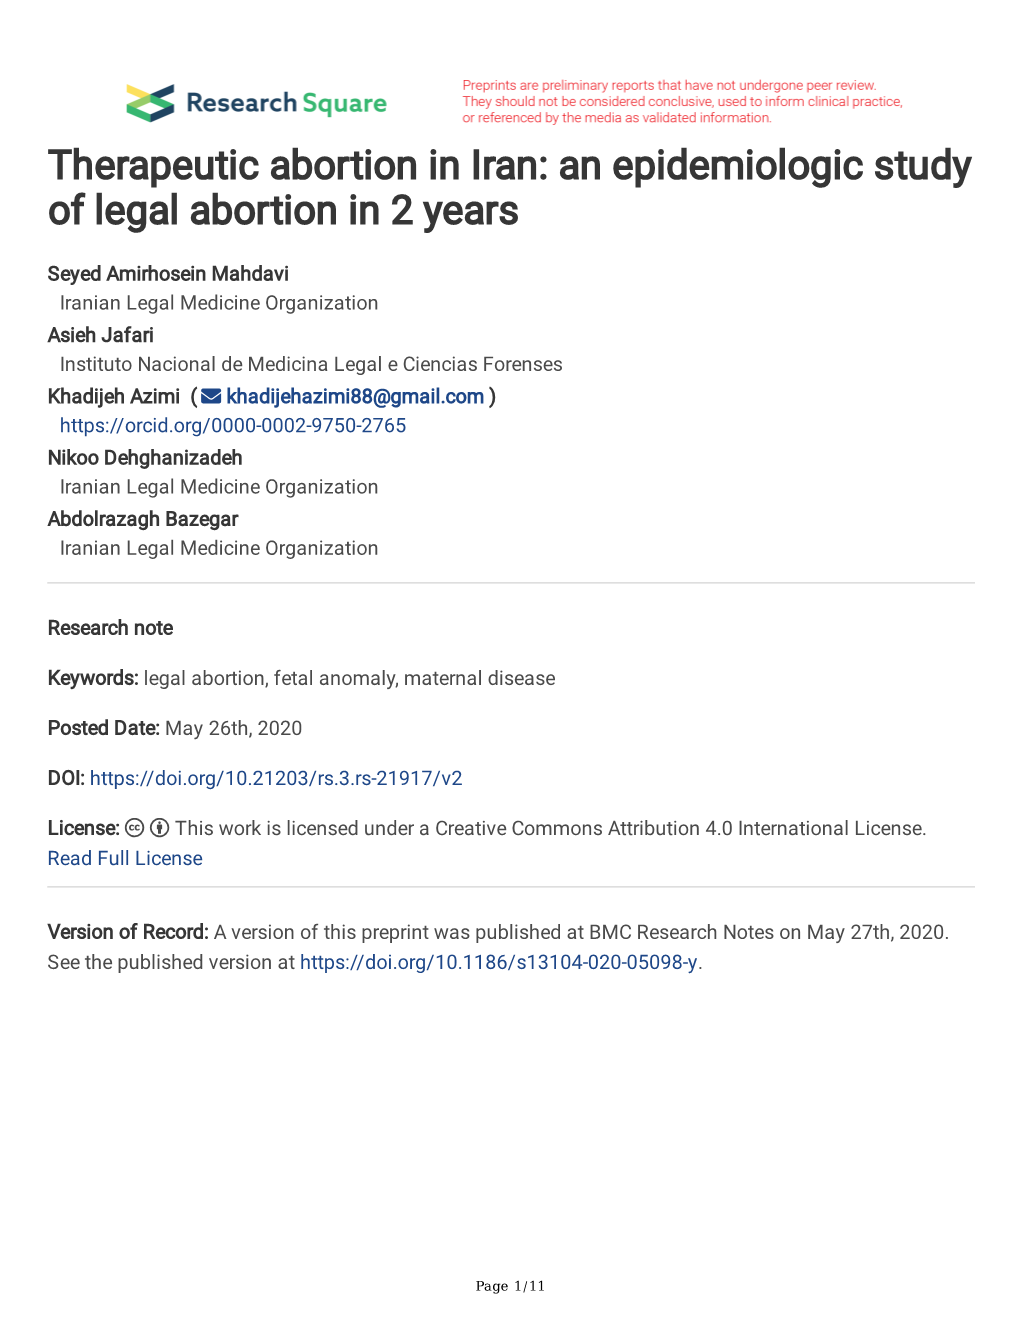 Therapeutic Abortion in Iran: an Epidemiologic Study of Legal Abortion in 2 Years